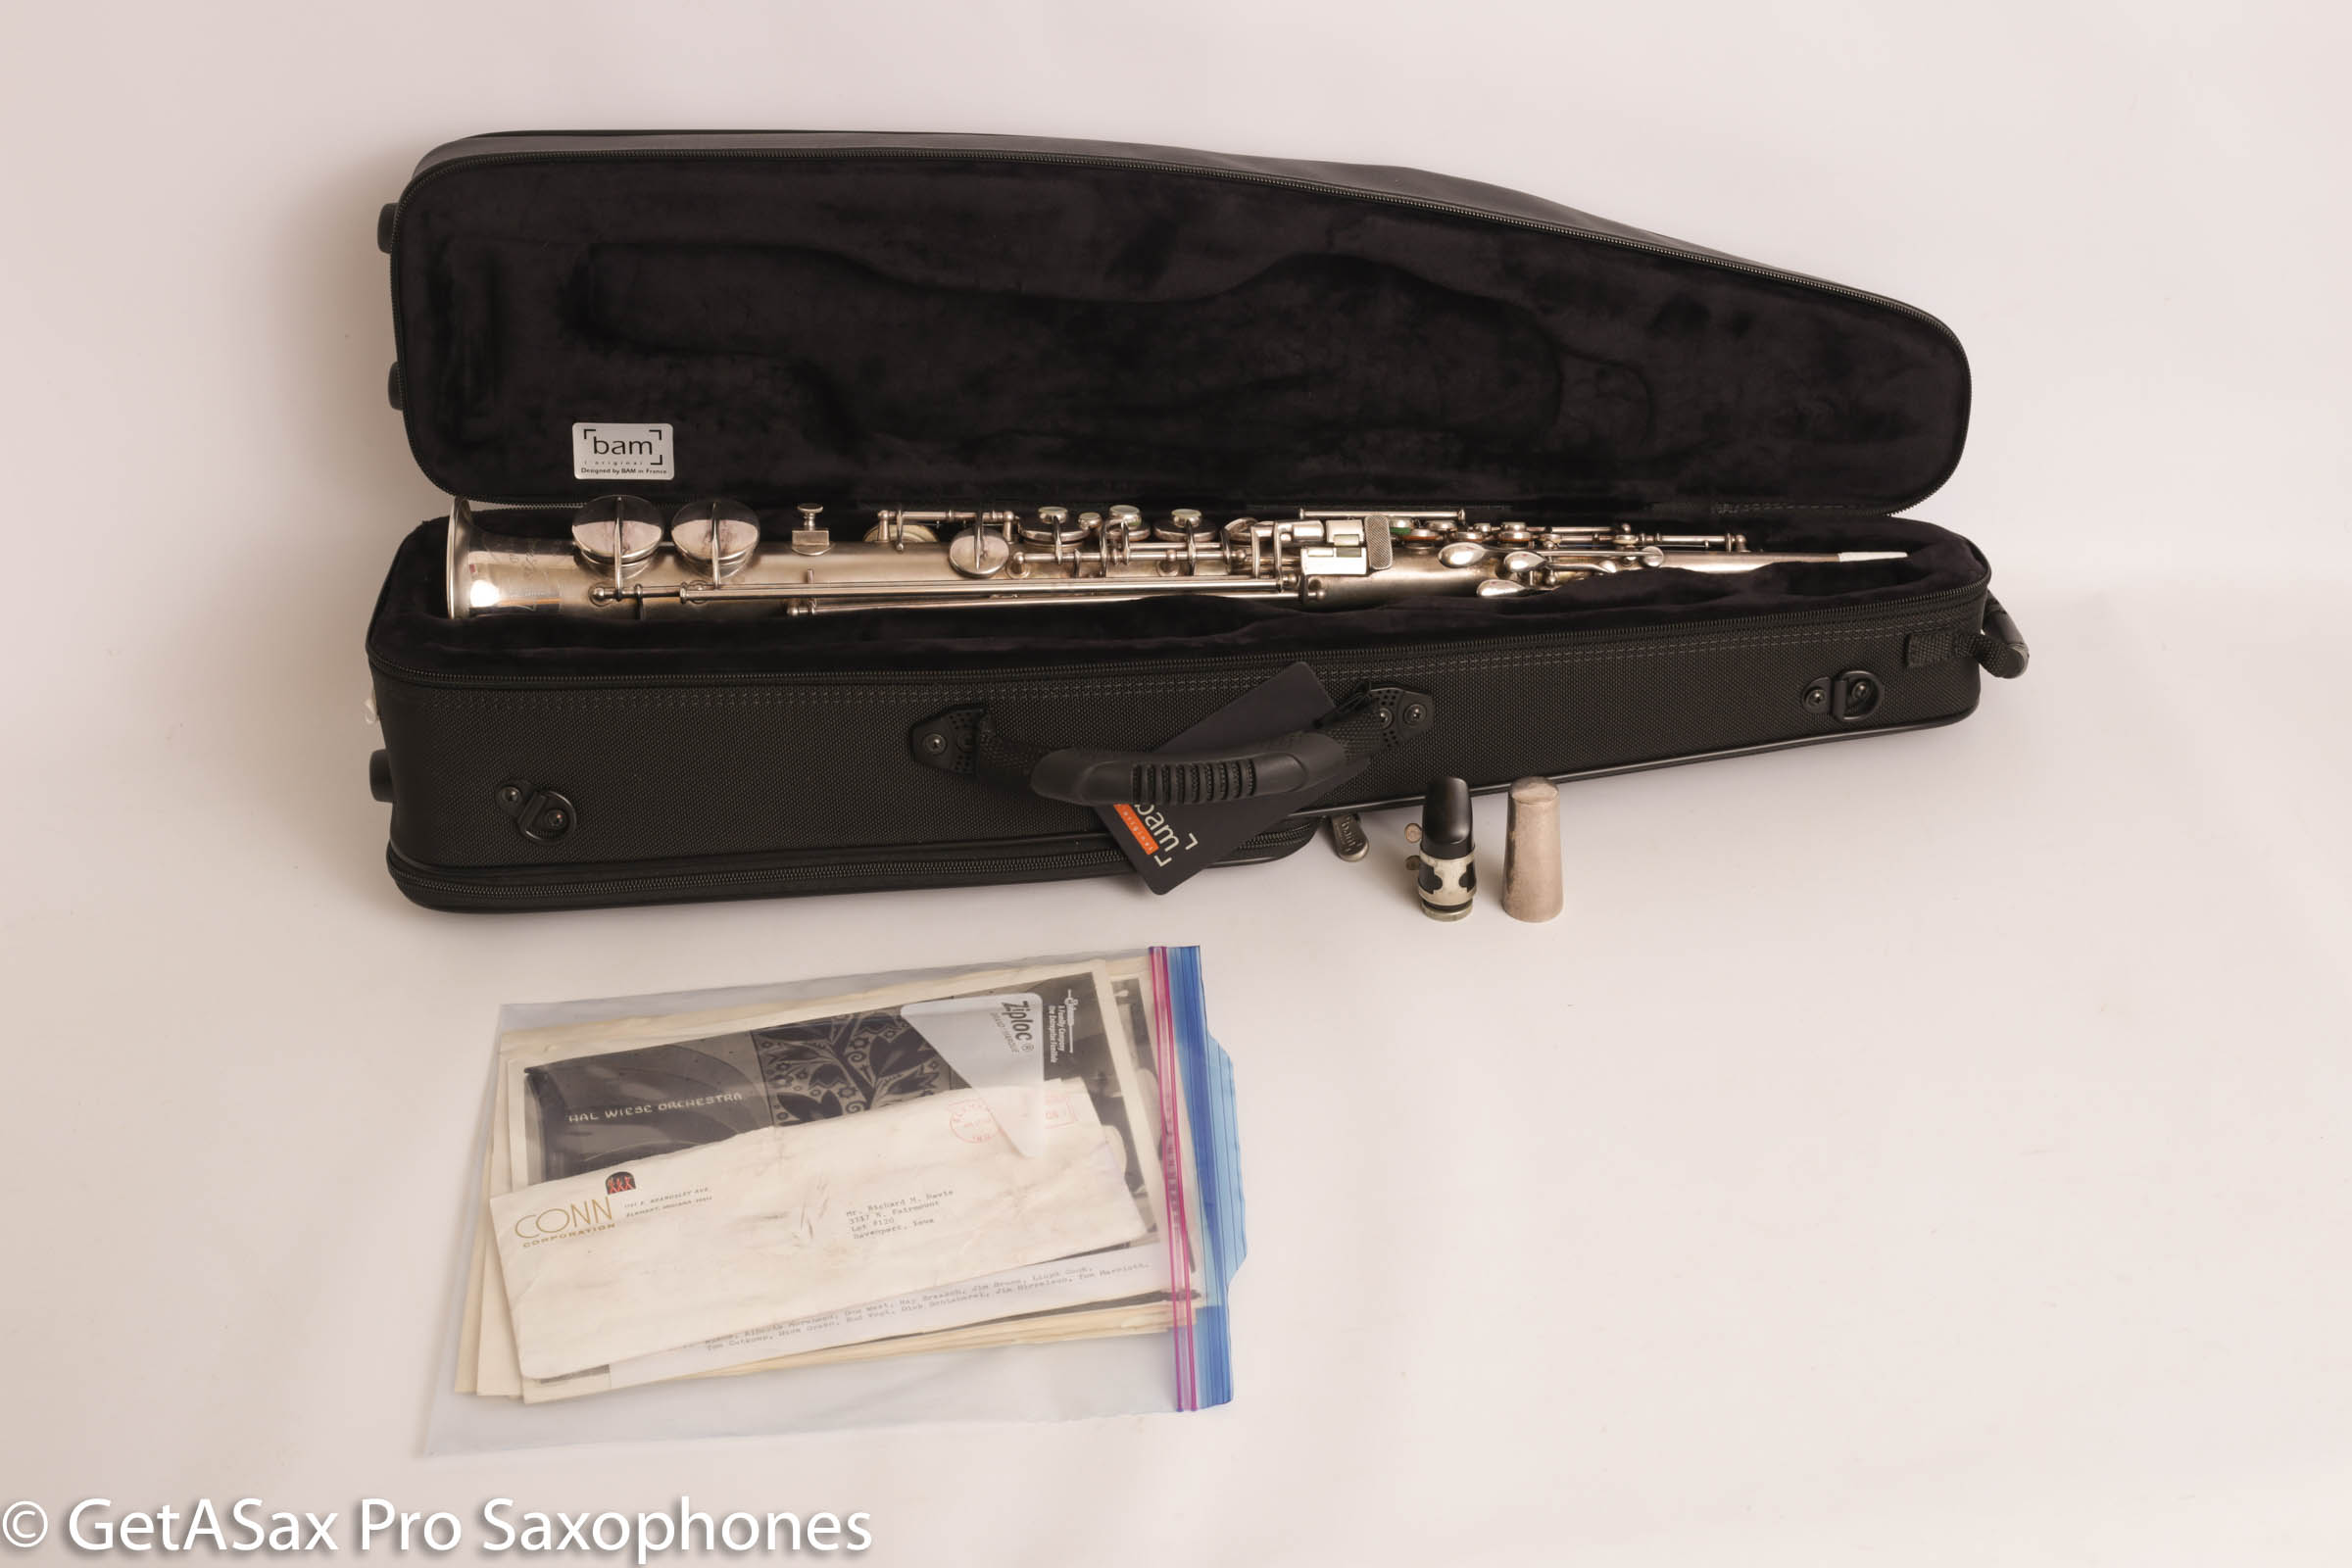 Conn-Selmer Clarinet Lyre With Ring Nickel – Russo Music Symphonic